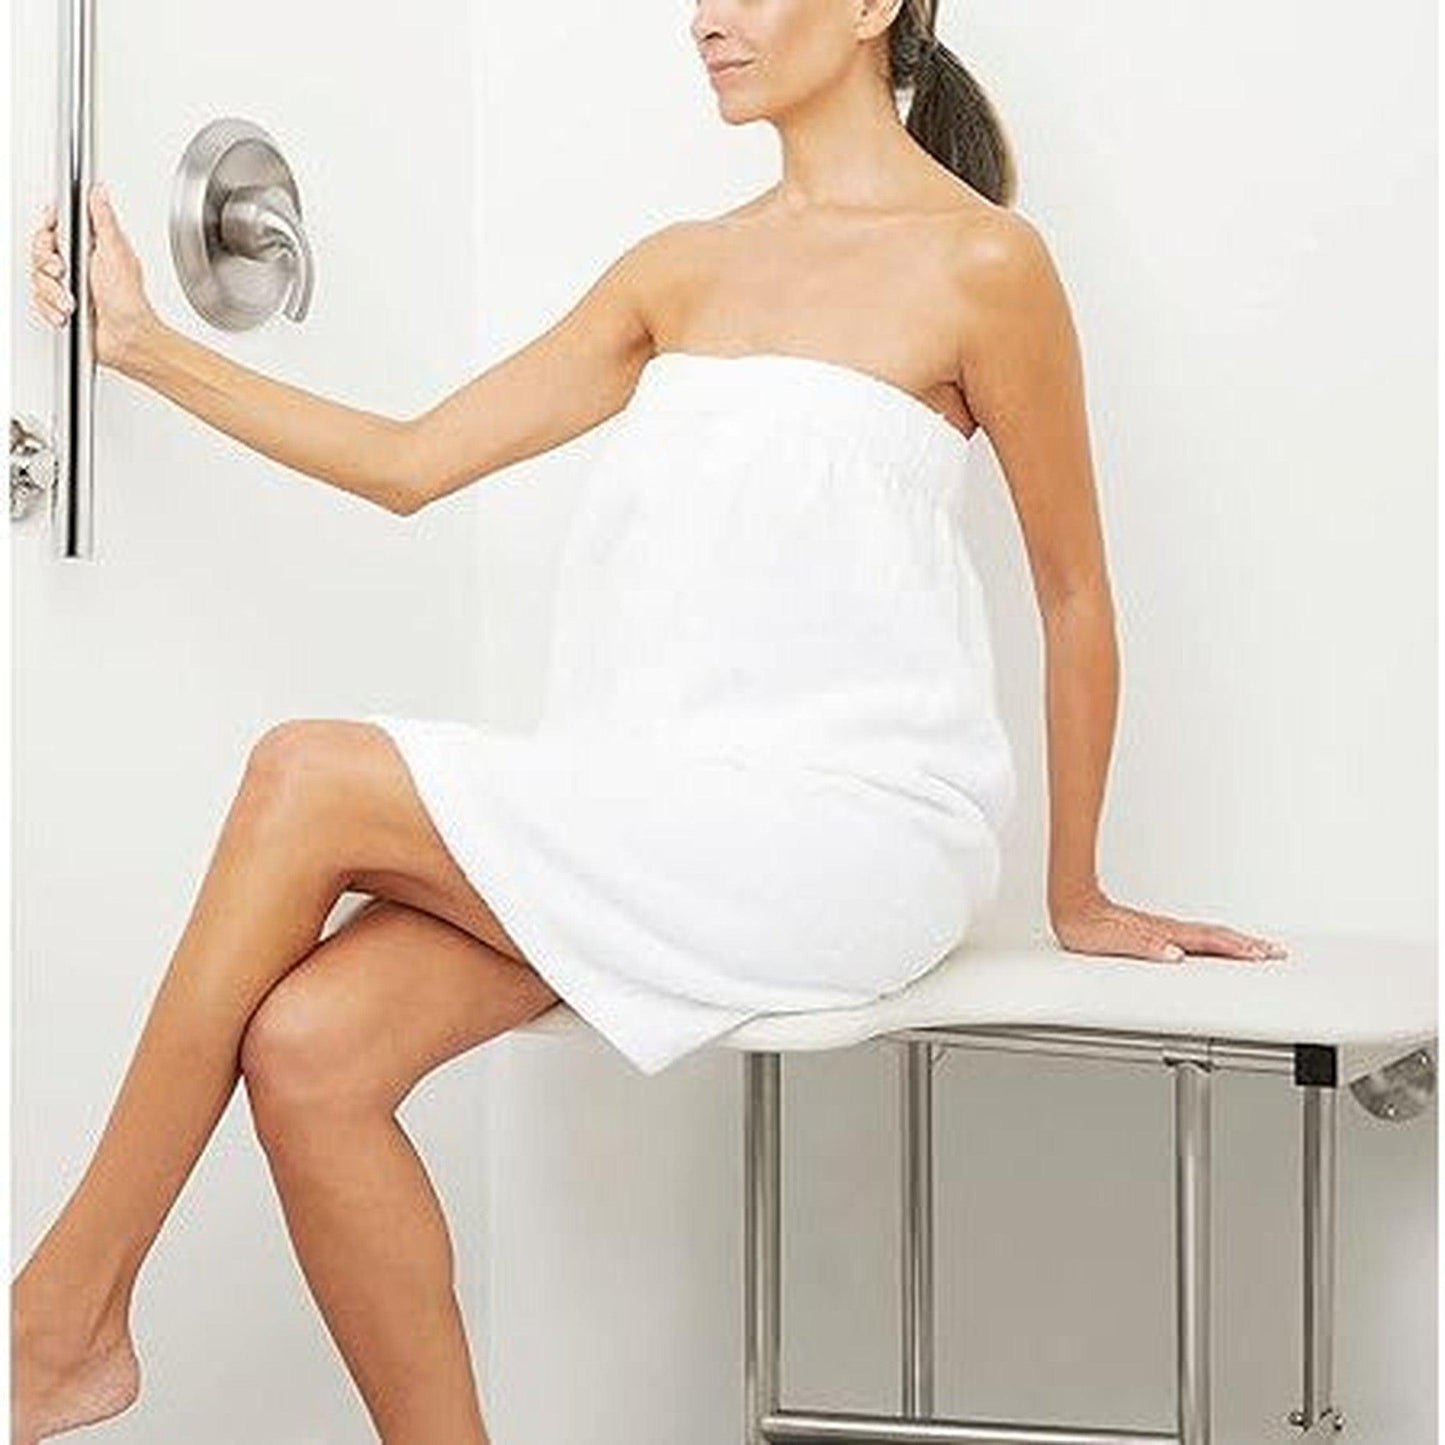 Seachrome Signature Series 36" W x 23" D Naugahyde White Cushion Right-Handed Configuration L-Shaped Transfer Shower Seat With Swing-Down Legs